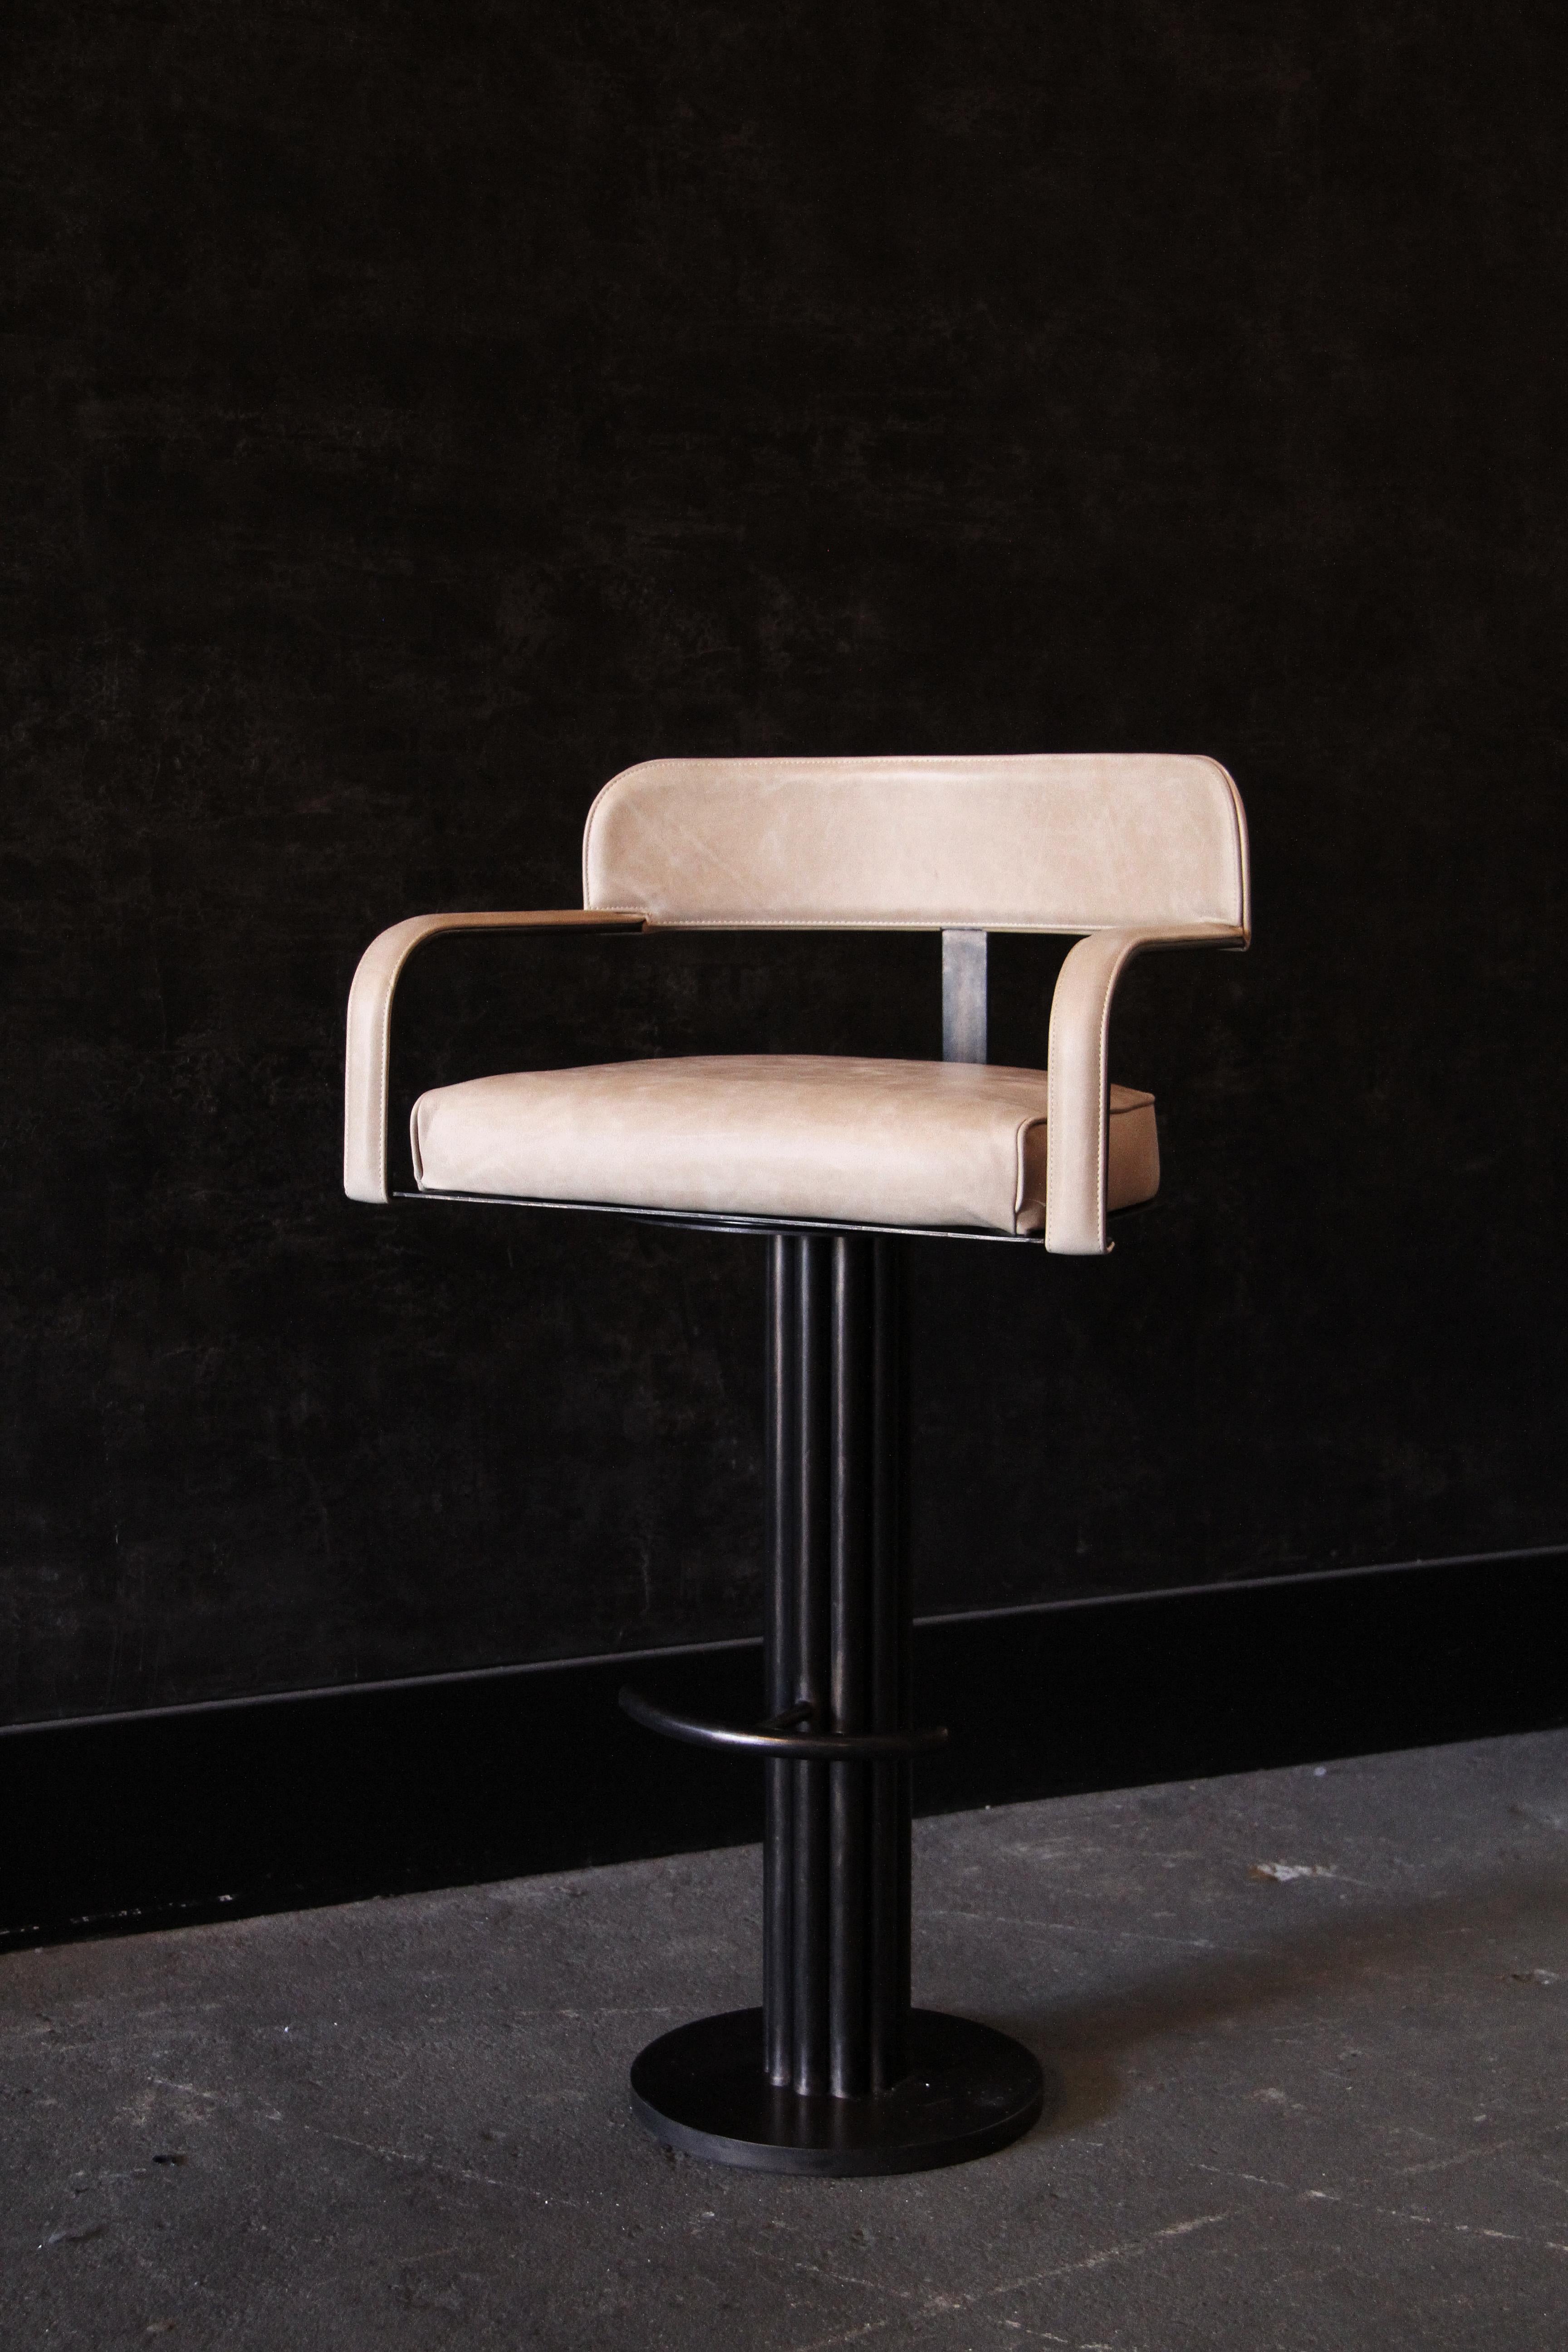 The (wh)ORE HAUS STUDIOS barstools are offered In two, adjustable heights  
 -Counter Height (adjustable from 23-28”) or 
- Bar Height (adjustable from 28-33”). 
 
The  stools are offered in x3 finishes- Blackened Steel, Bronze Rubbed Steel and